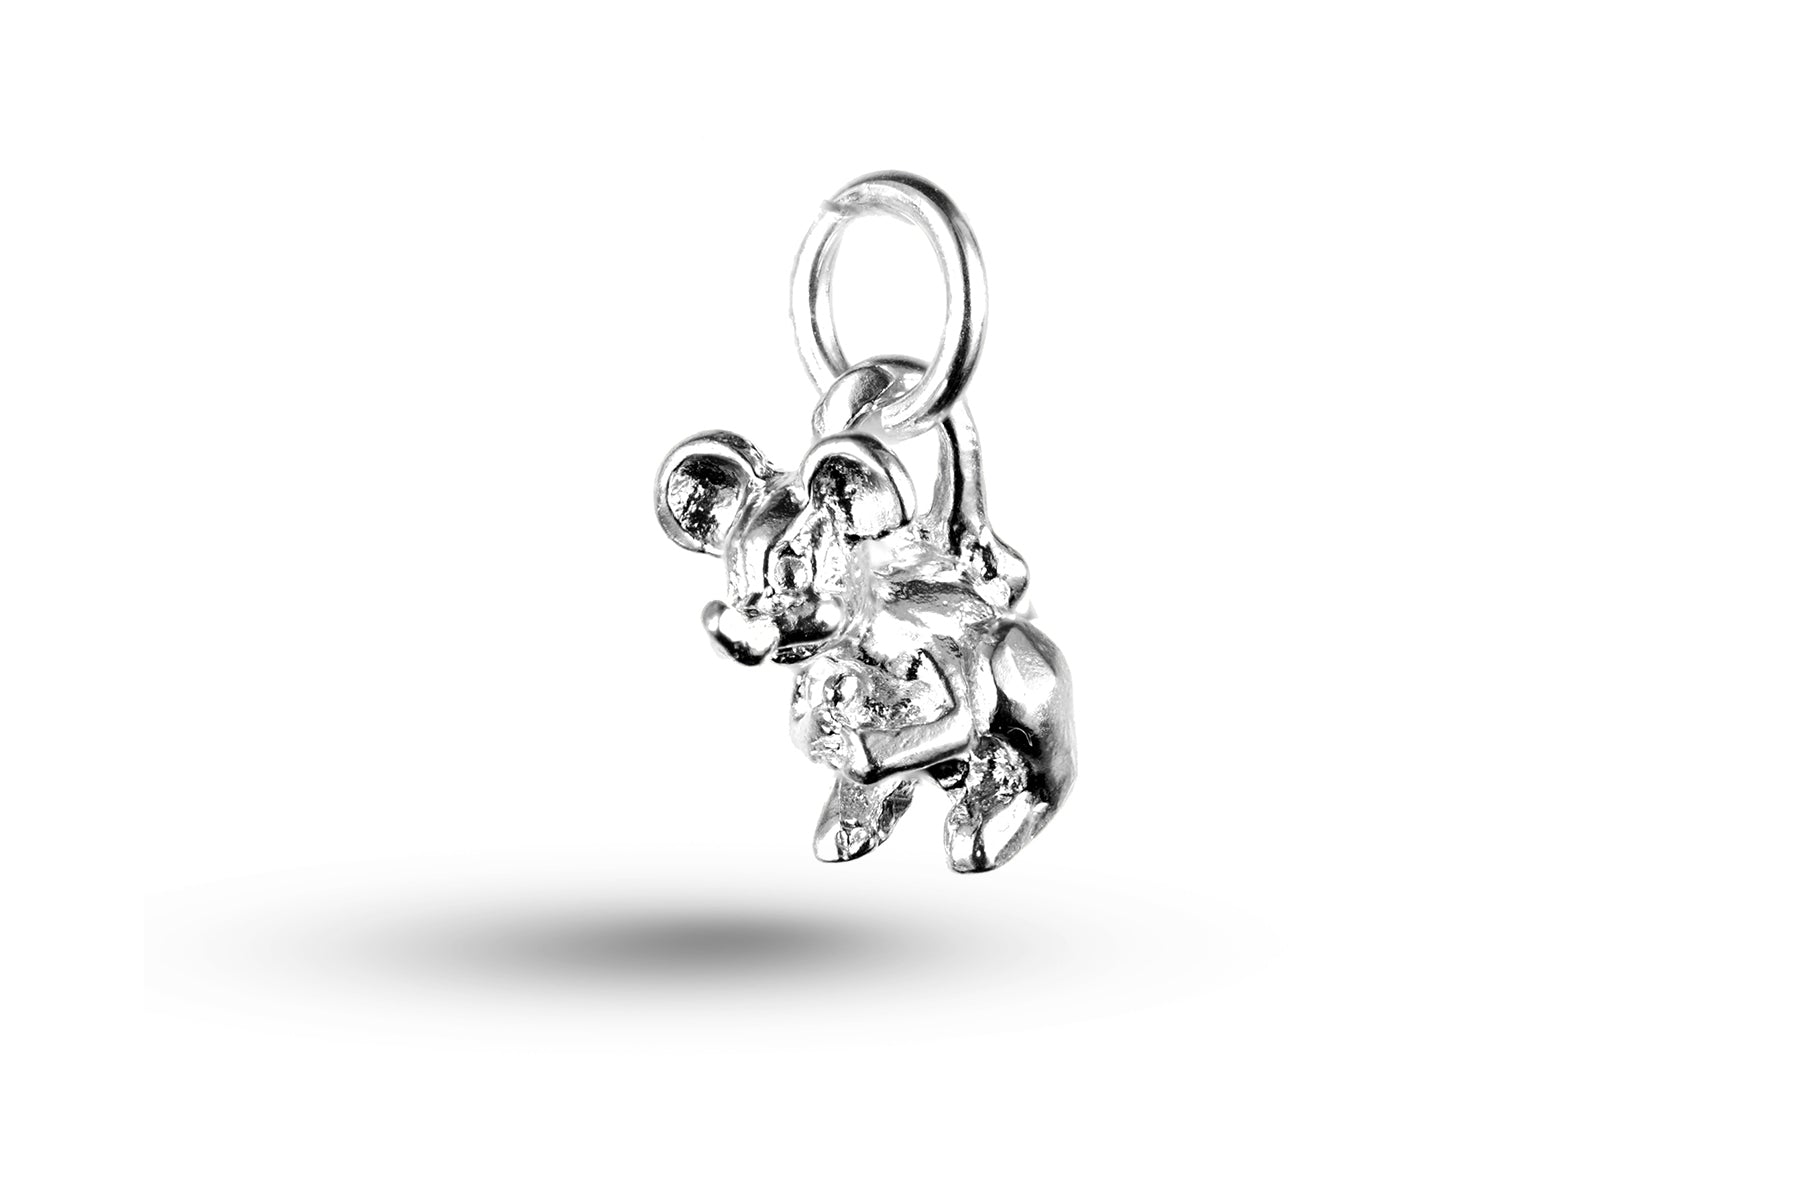 White gold Crouching Mouse Charm.